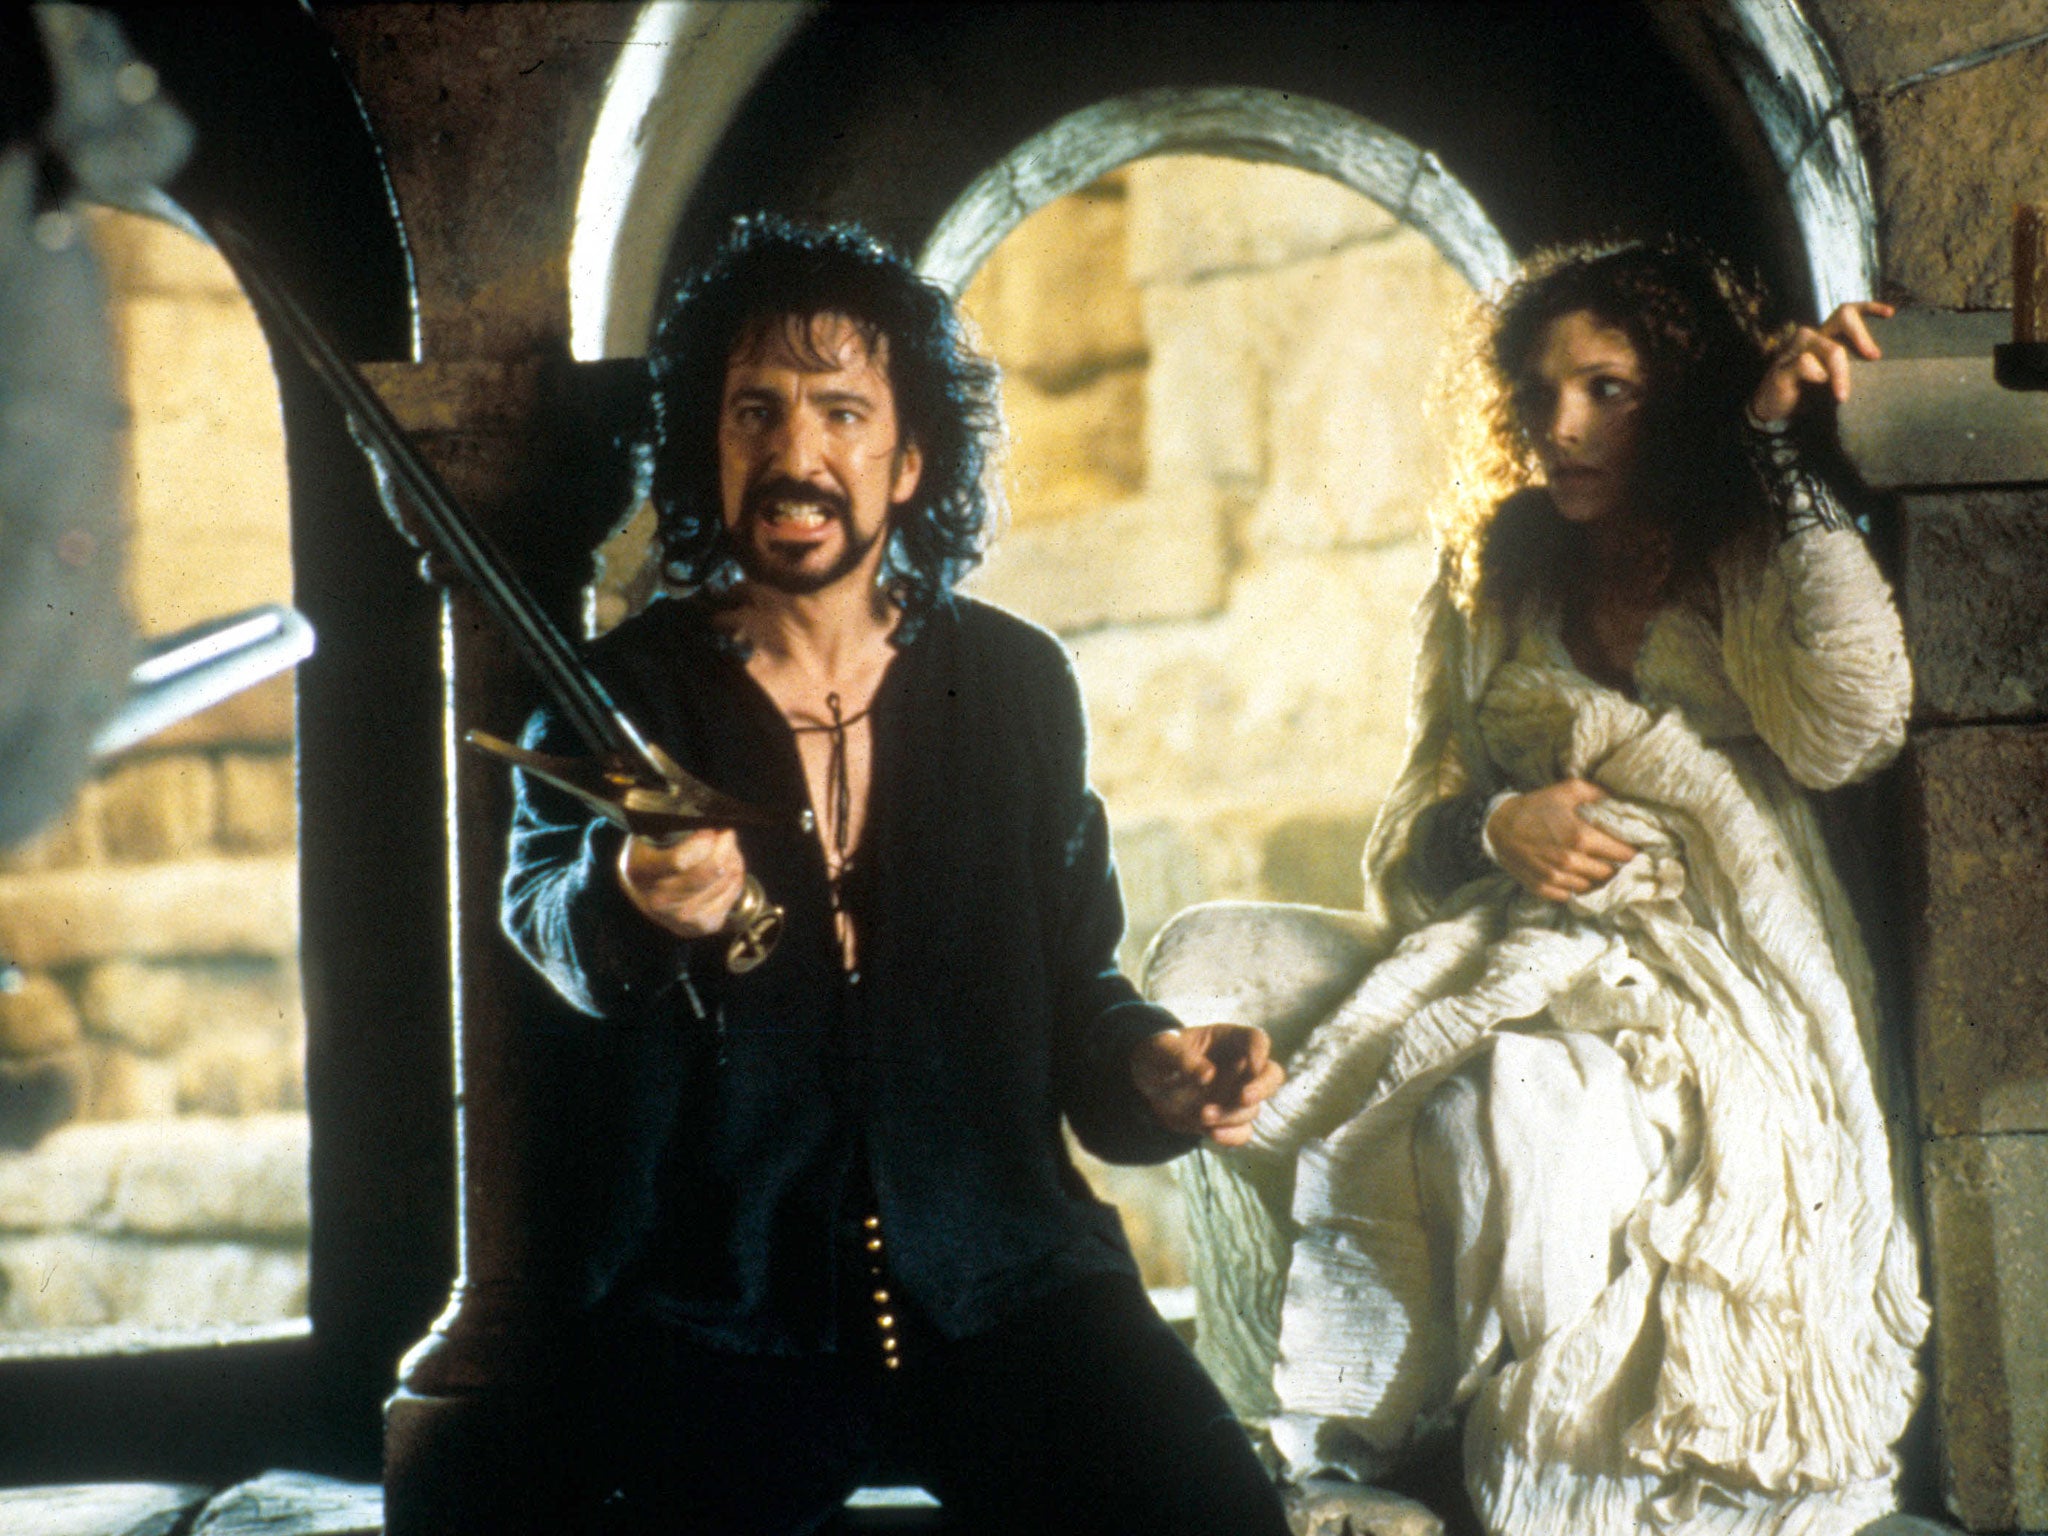 Rickman as the outrageous Sheriff of Nottingham in Robin Hood: Prince of Thieves in 1991